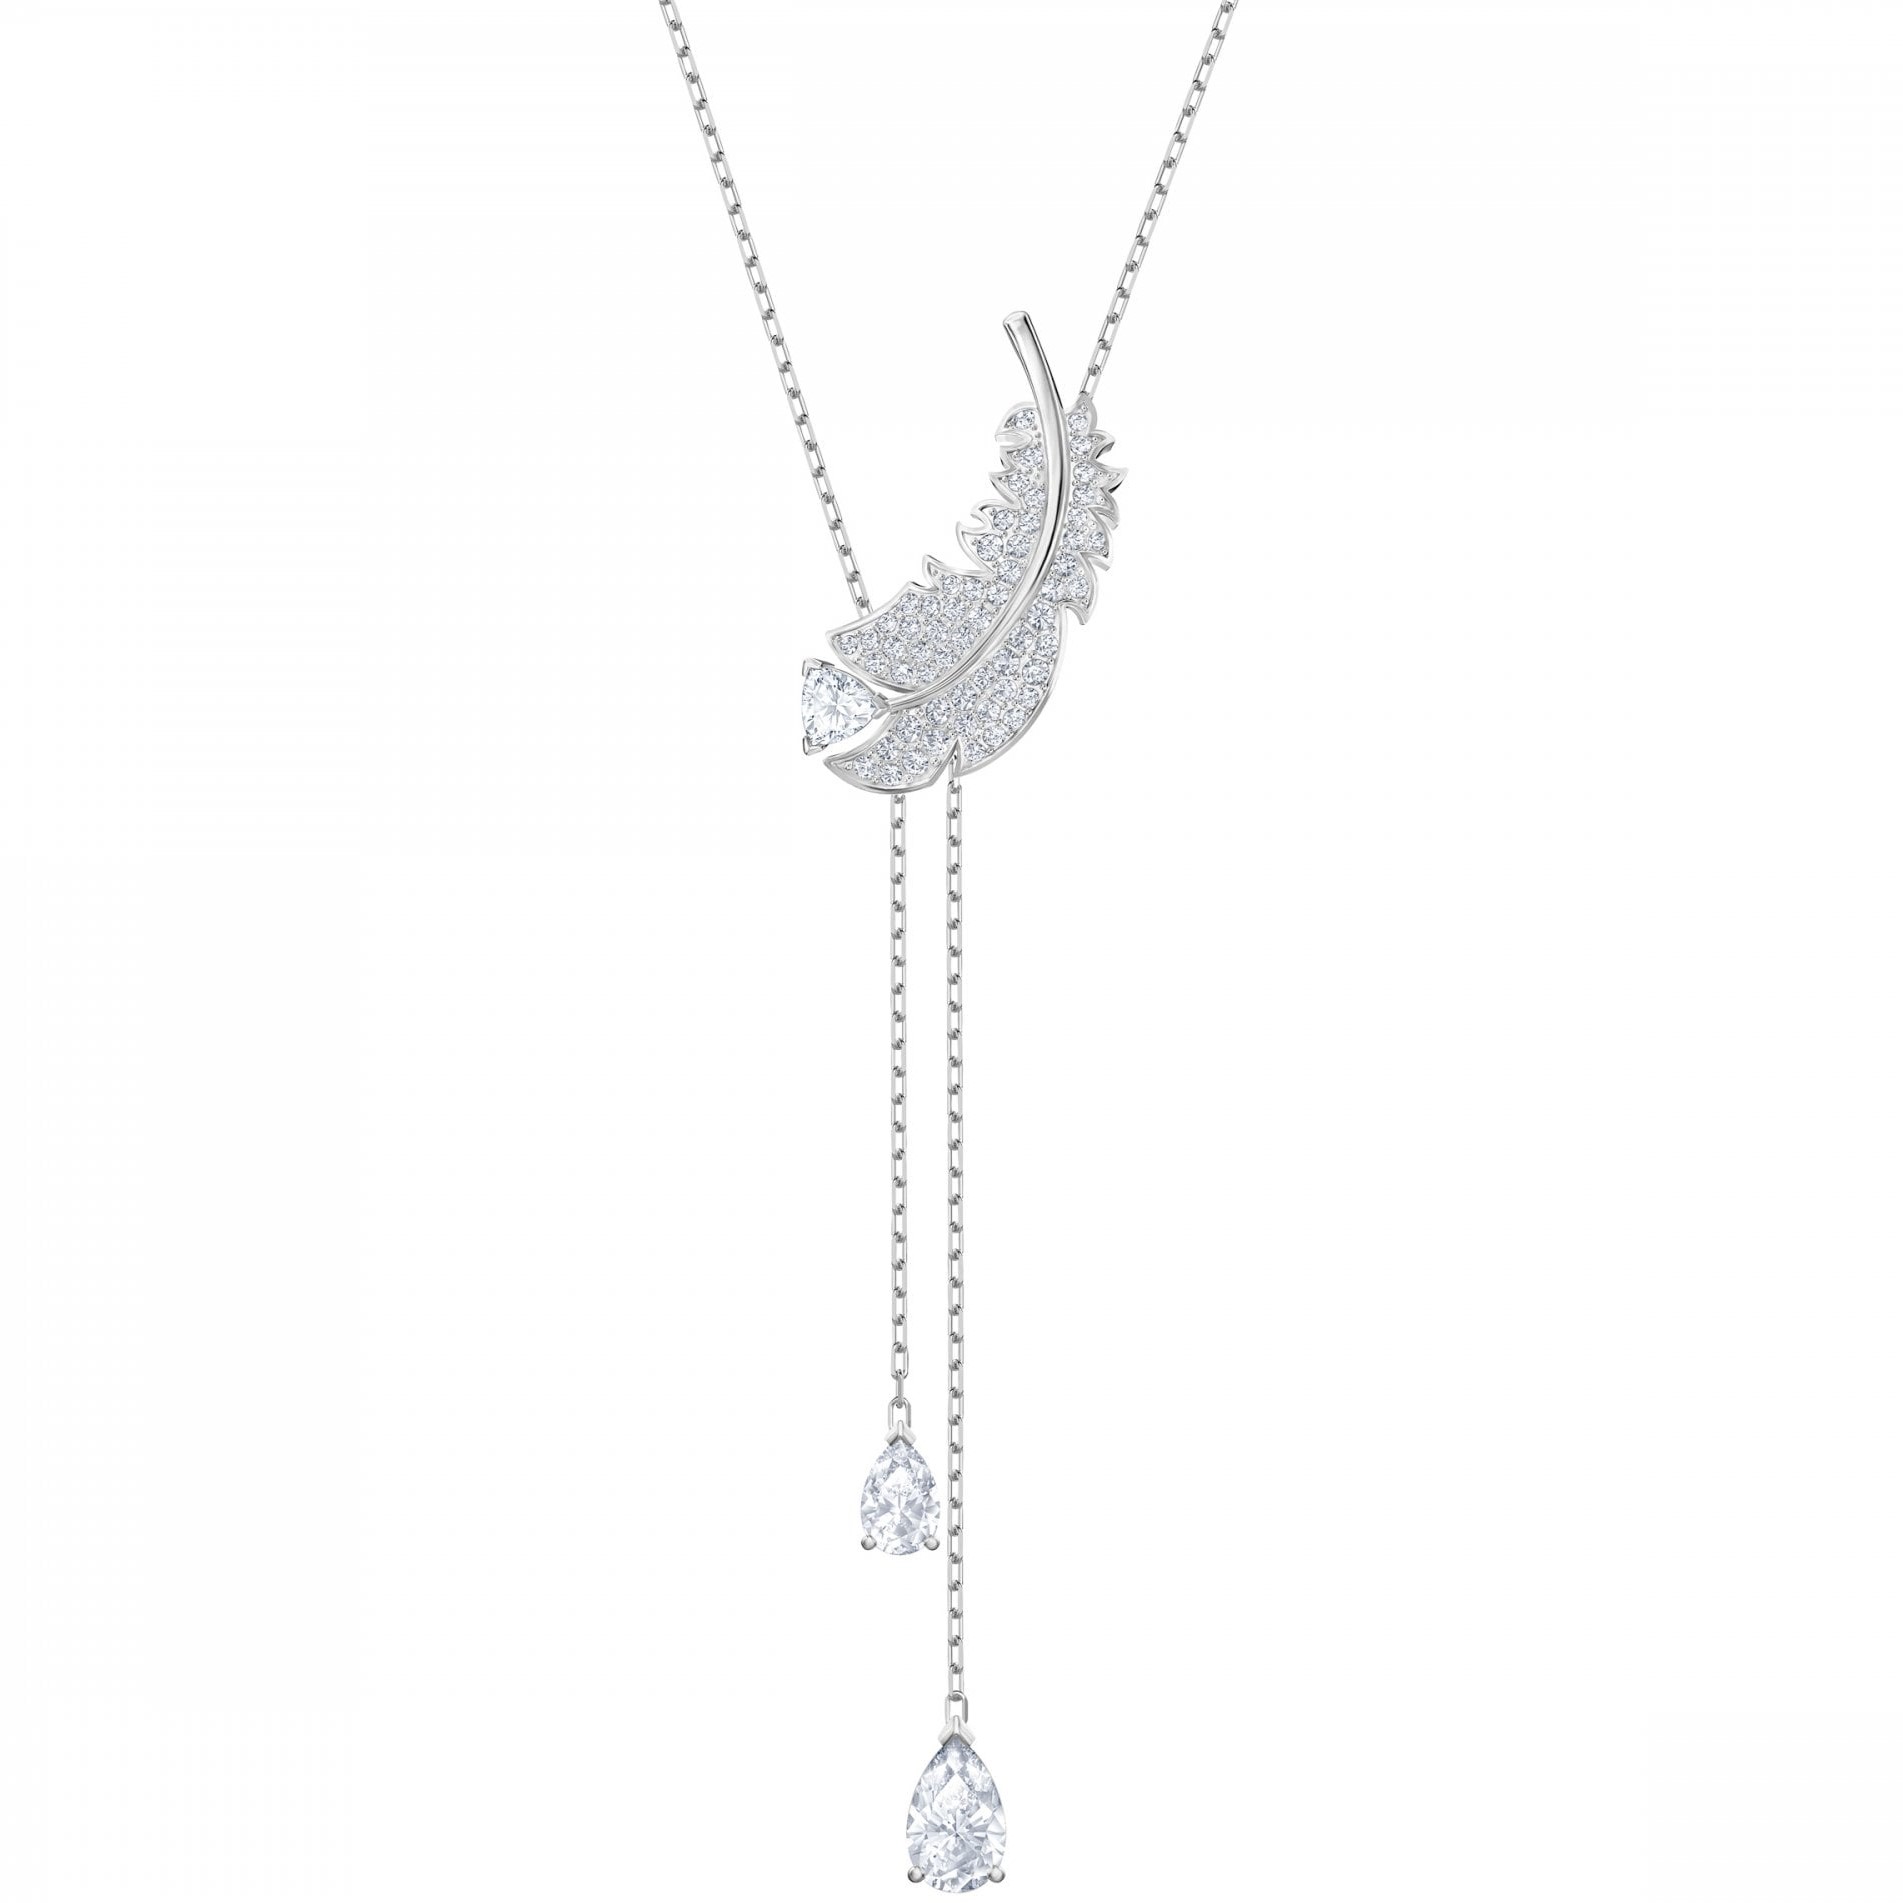 DÂY CHUYỀN SWAROVSKI LÔNG NGỖNG NICE Y NECKLACE WHITE RHODIUM PLATED 5493397 4